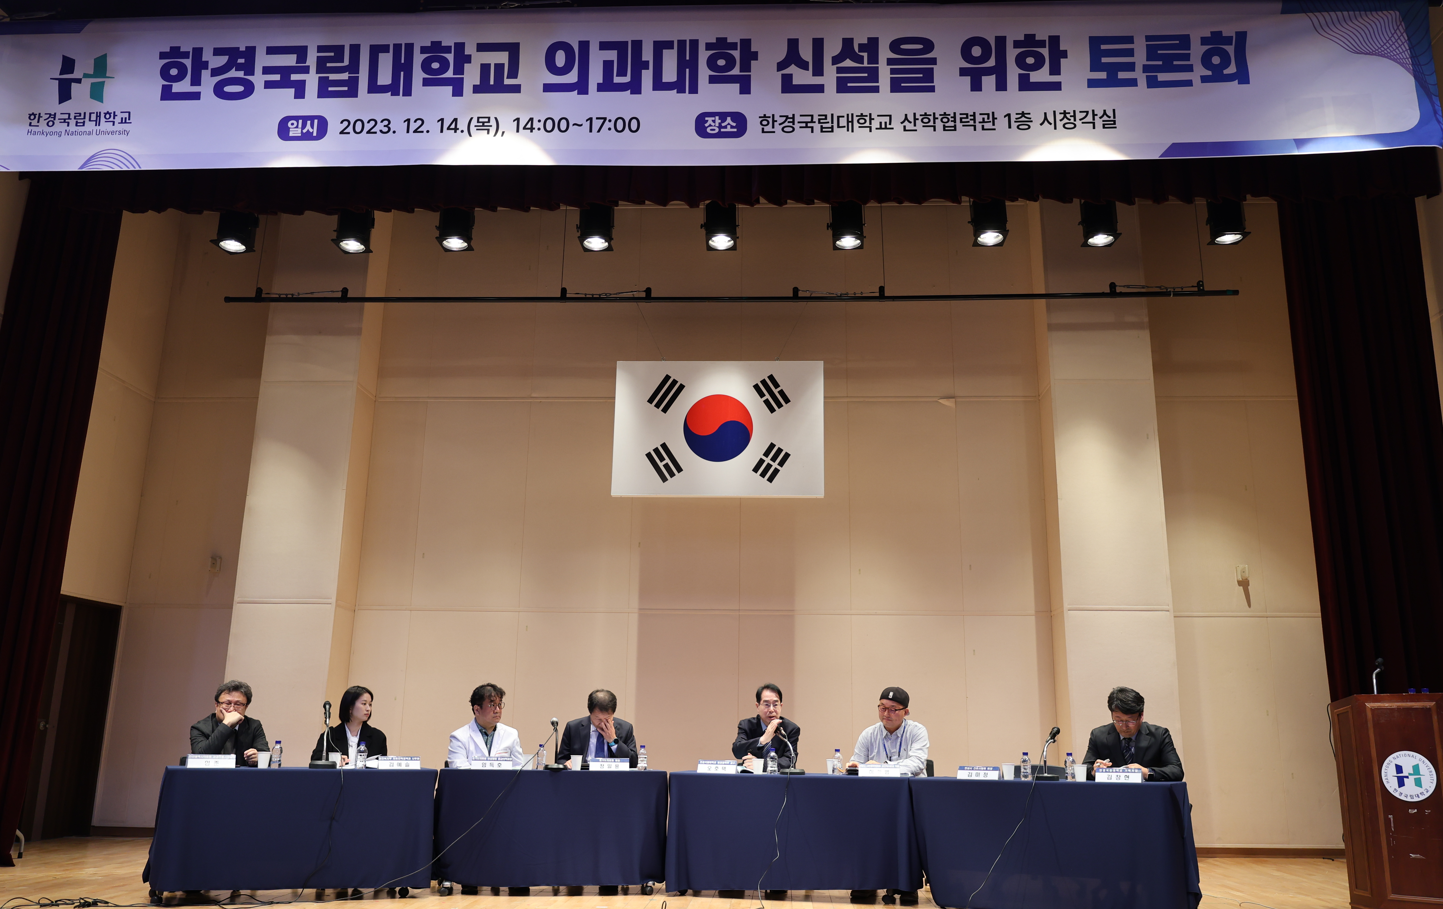 Hankyung National University successfully held a discussion for the establishment of a new medical school